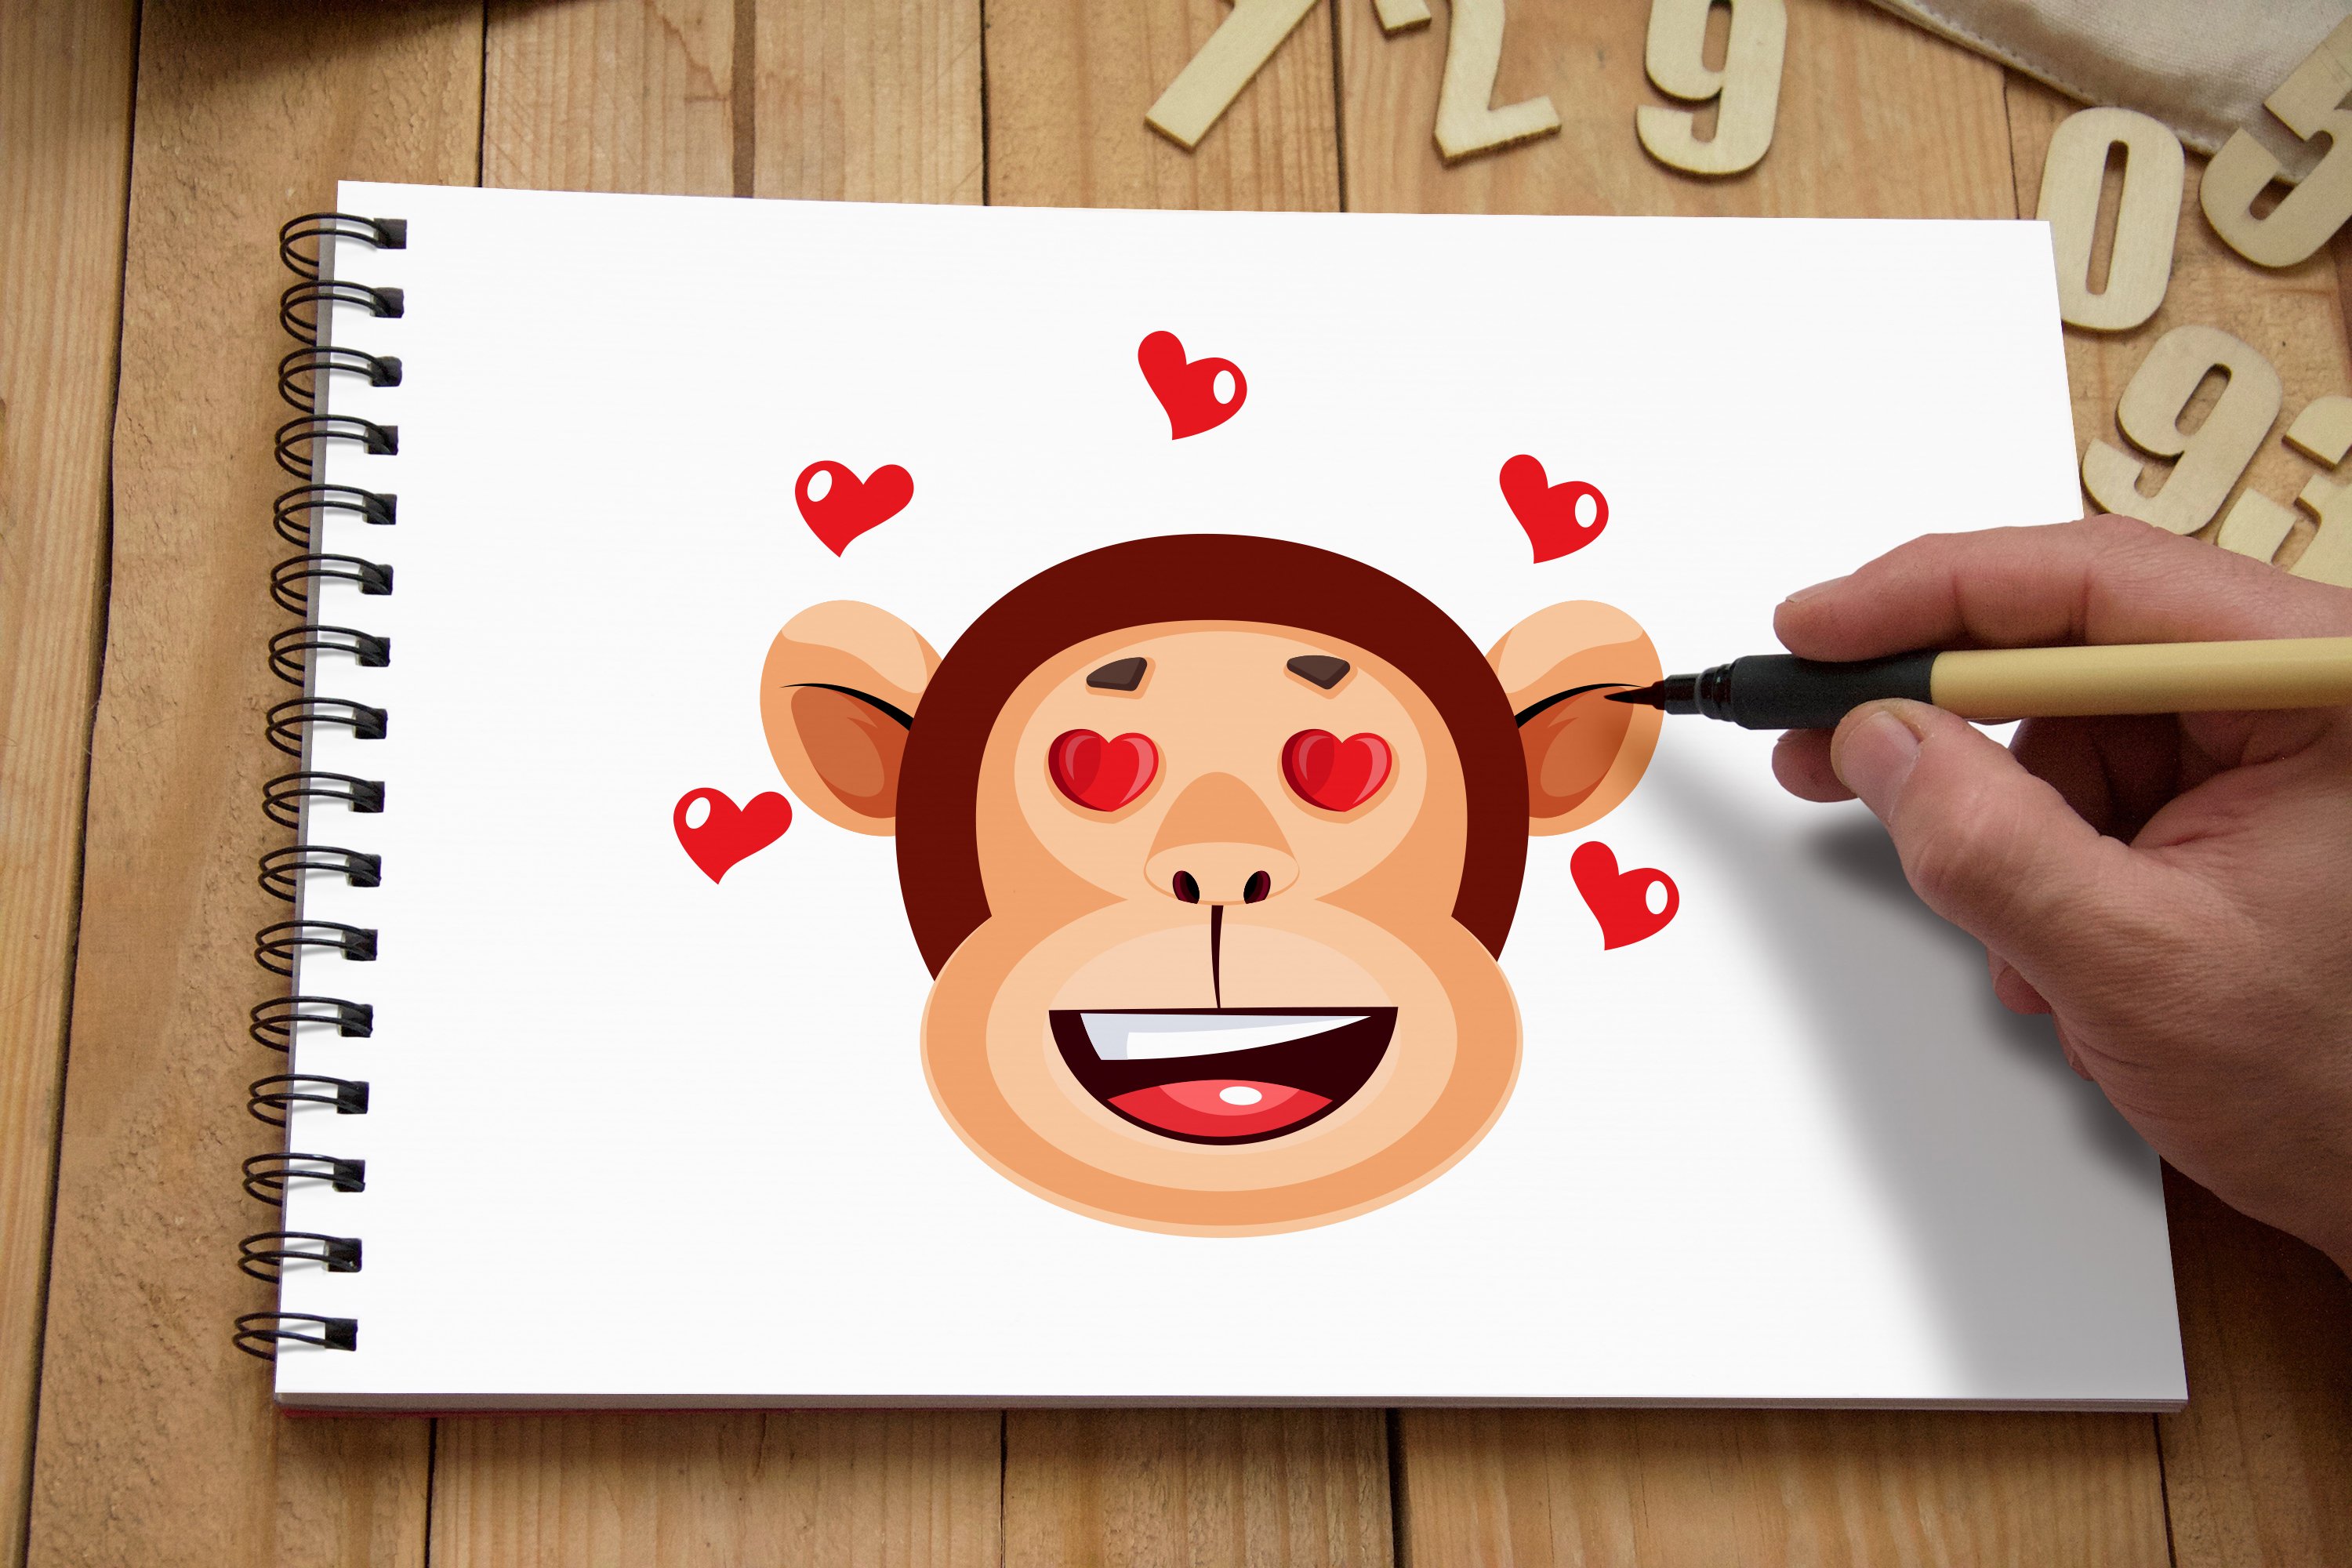 Monkey face with hearts.